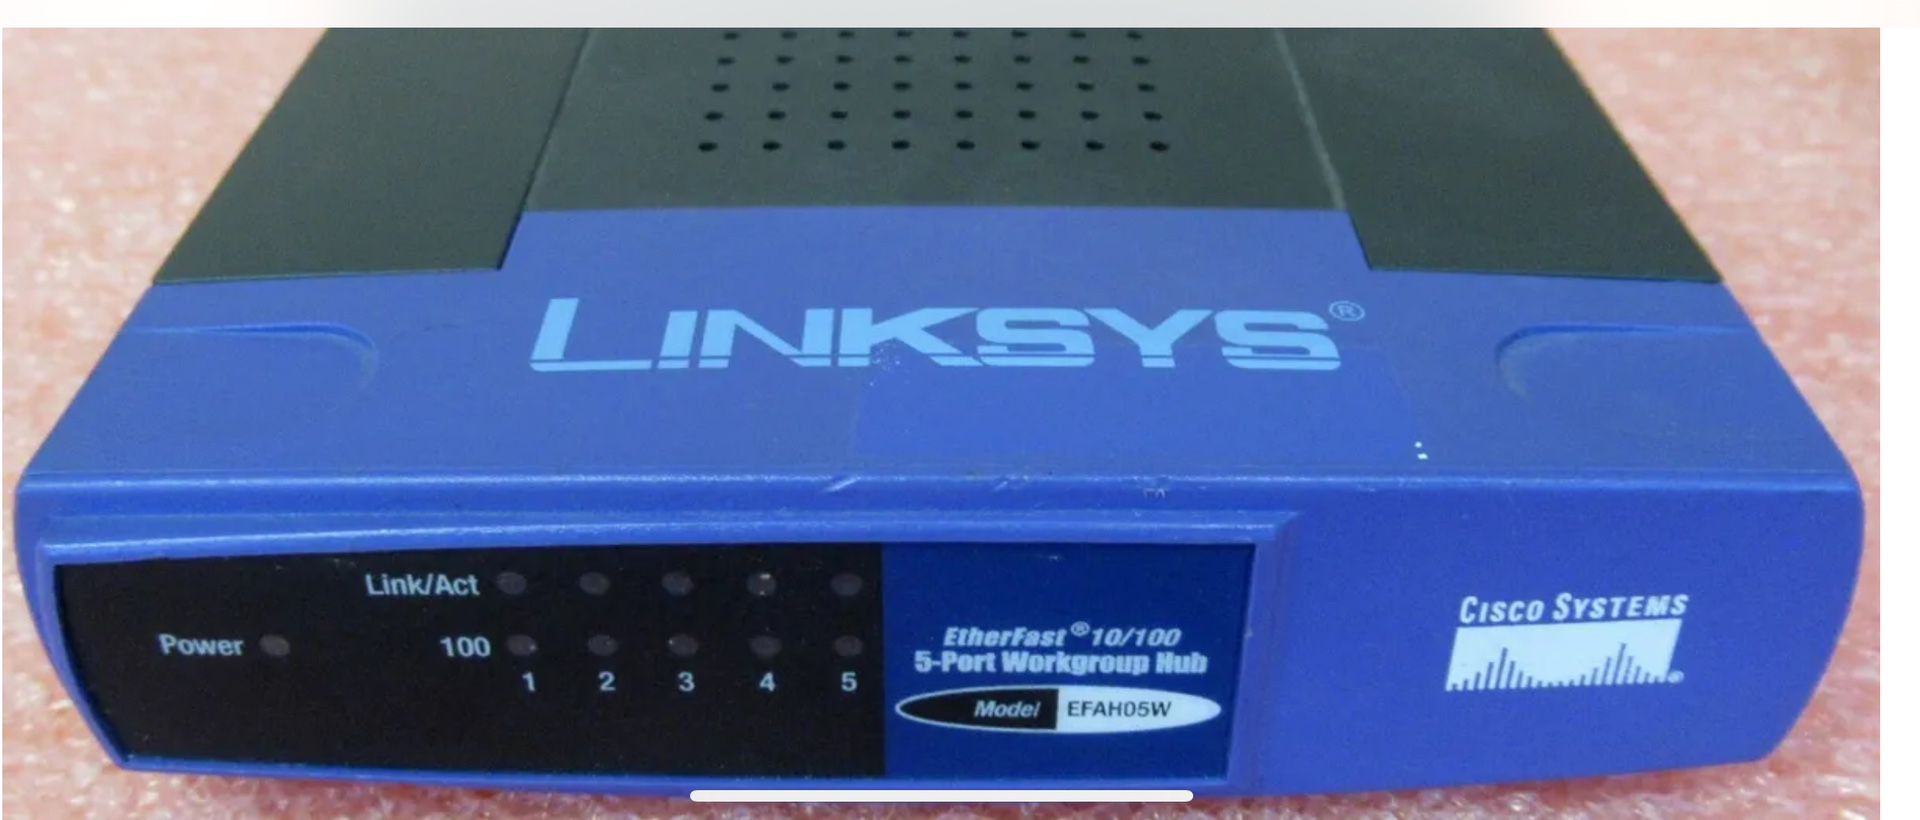 Cisco Linksys EFAHO5W EtherFast 10/100 5- Port Workgroup Hub AC Adapter Included